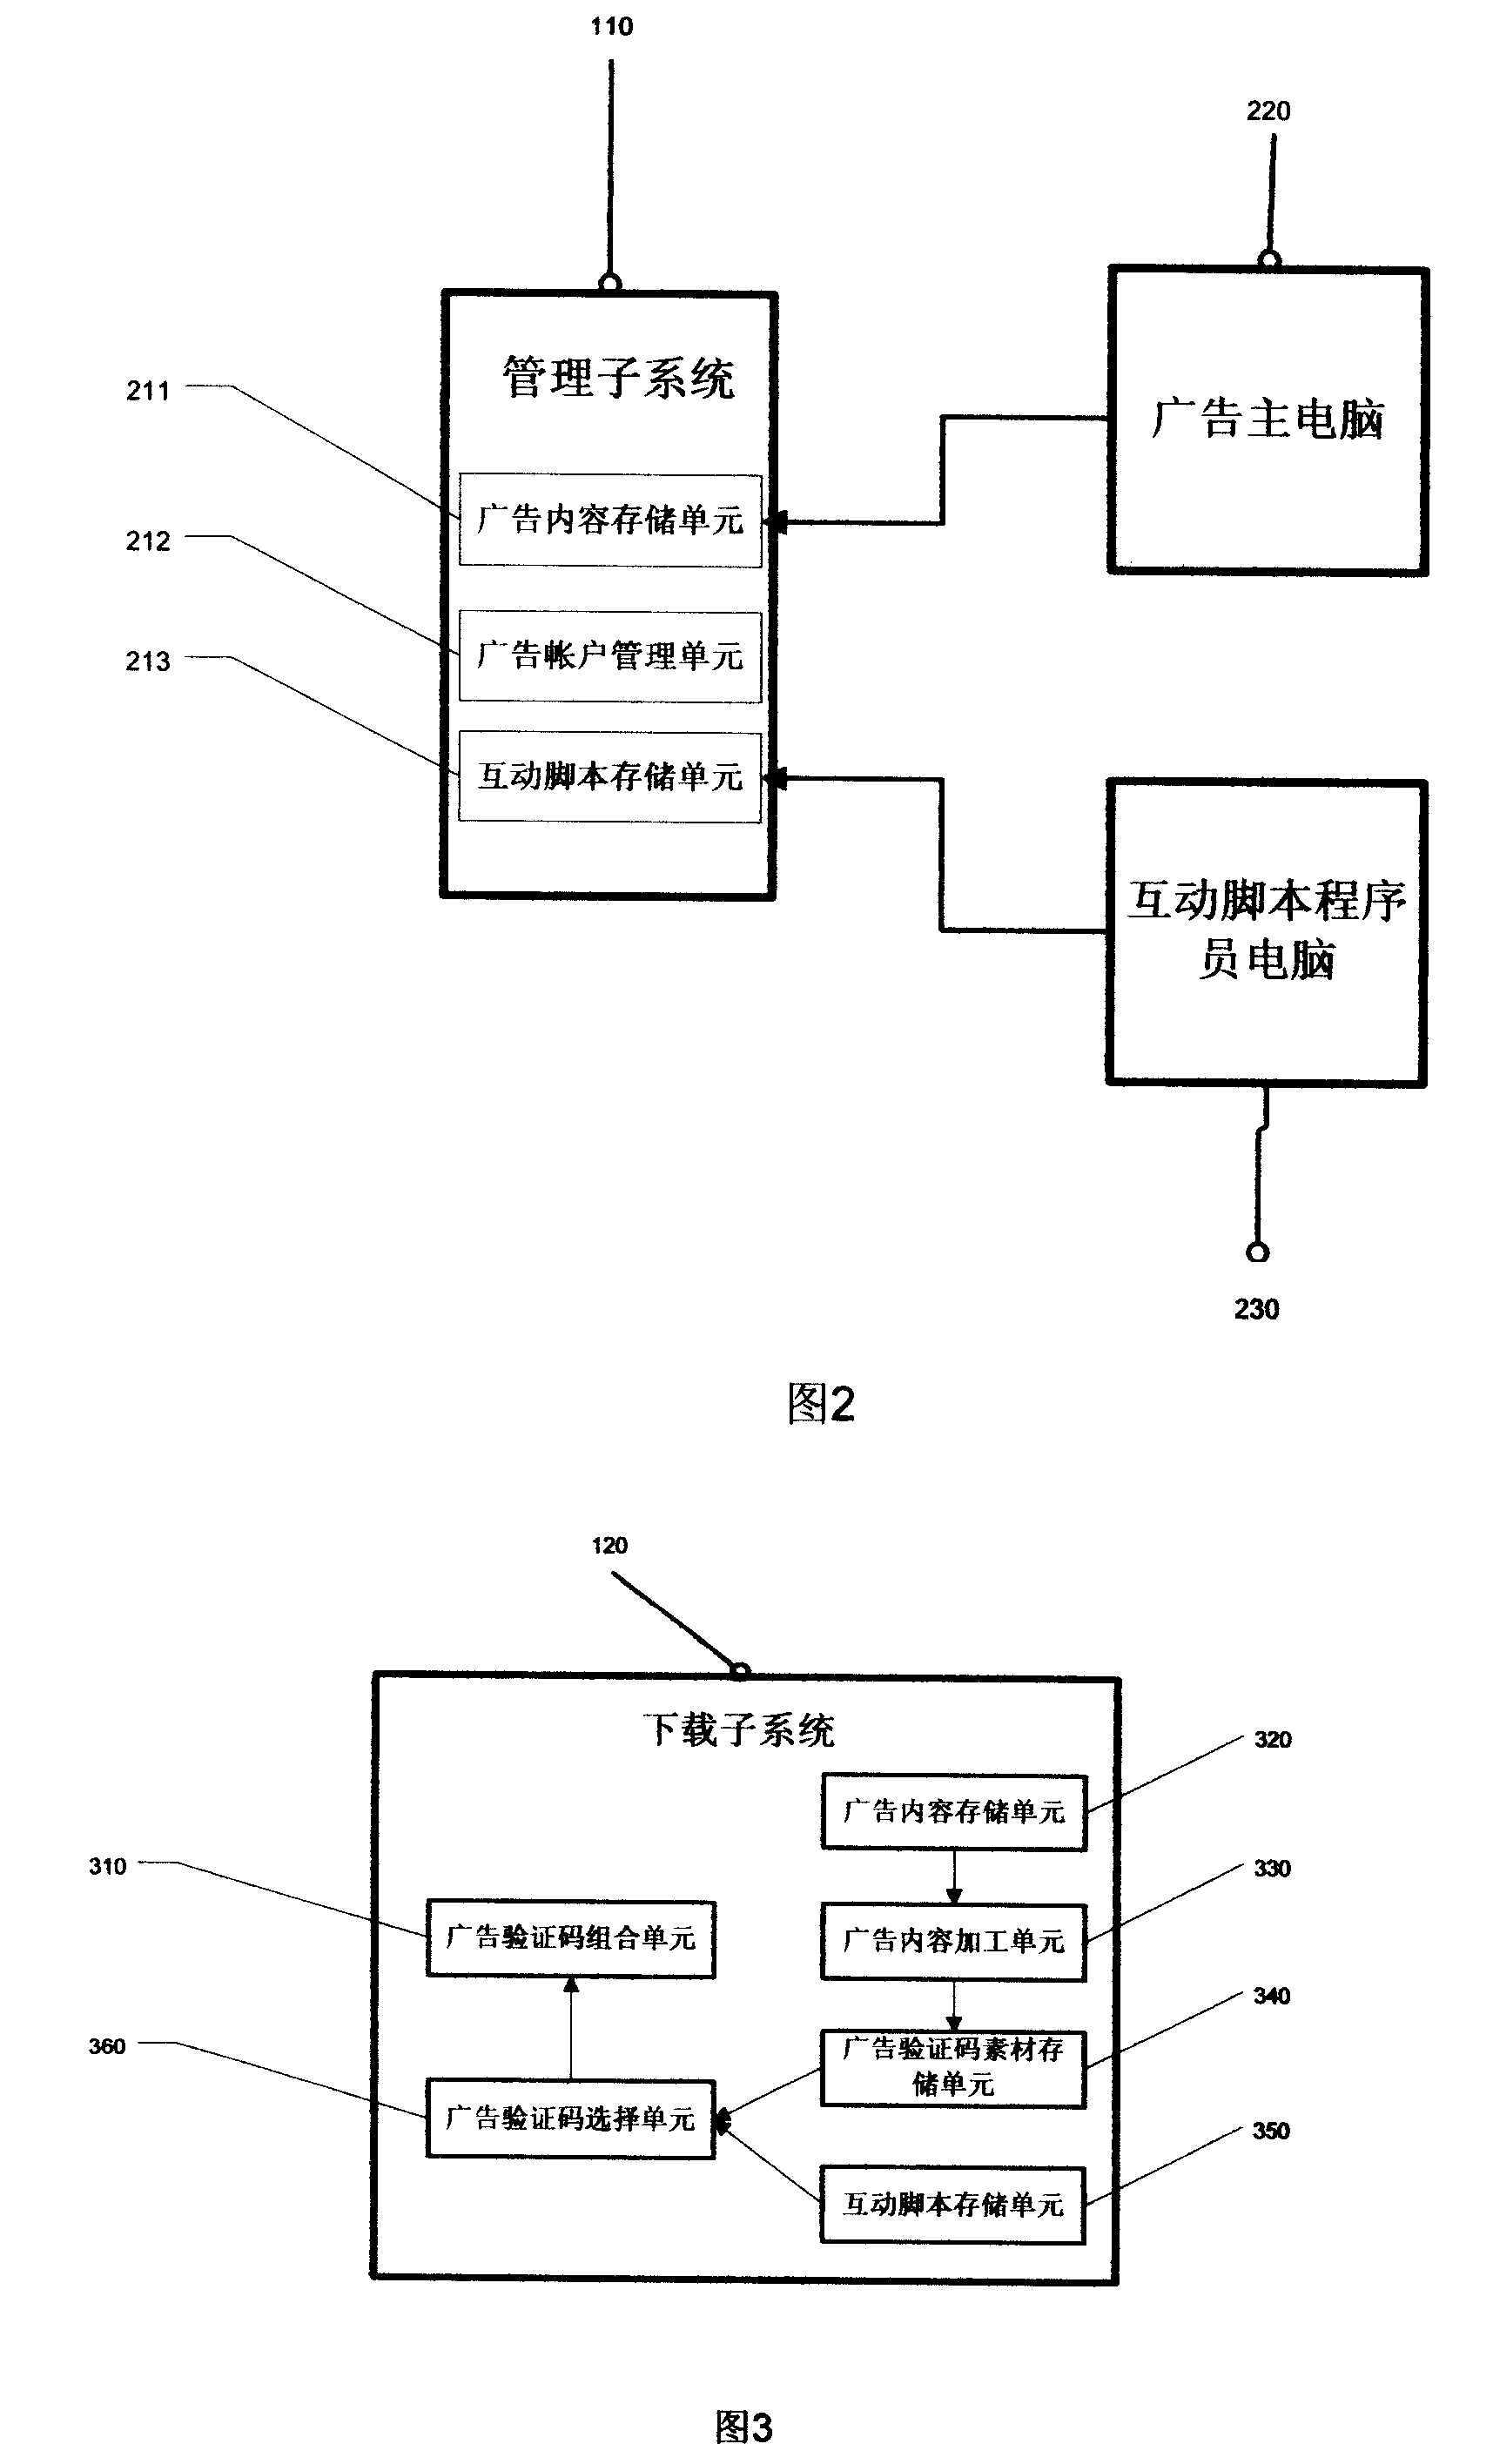 Advertisement content creating verification information system and method